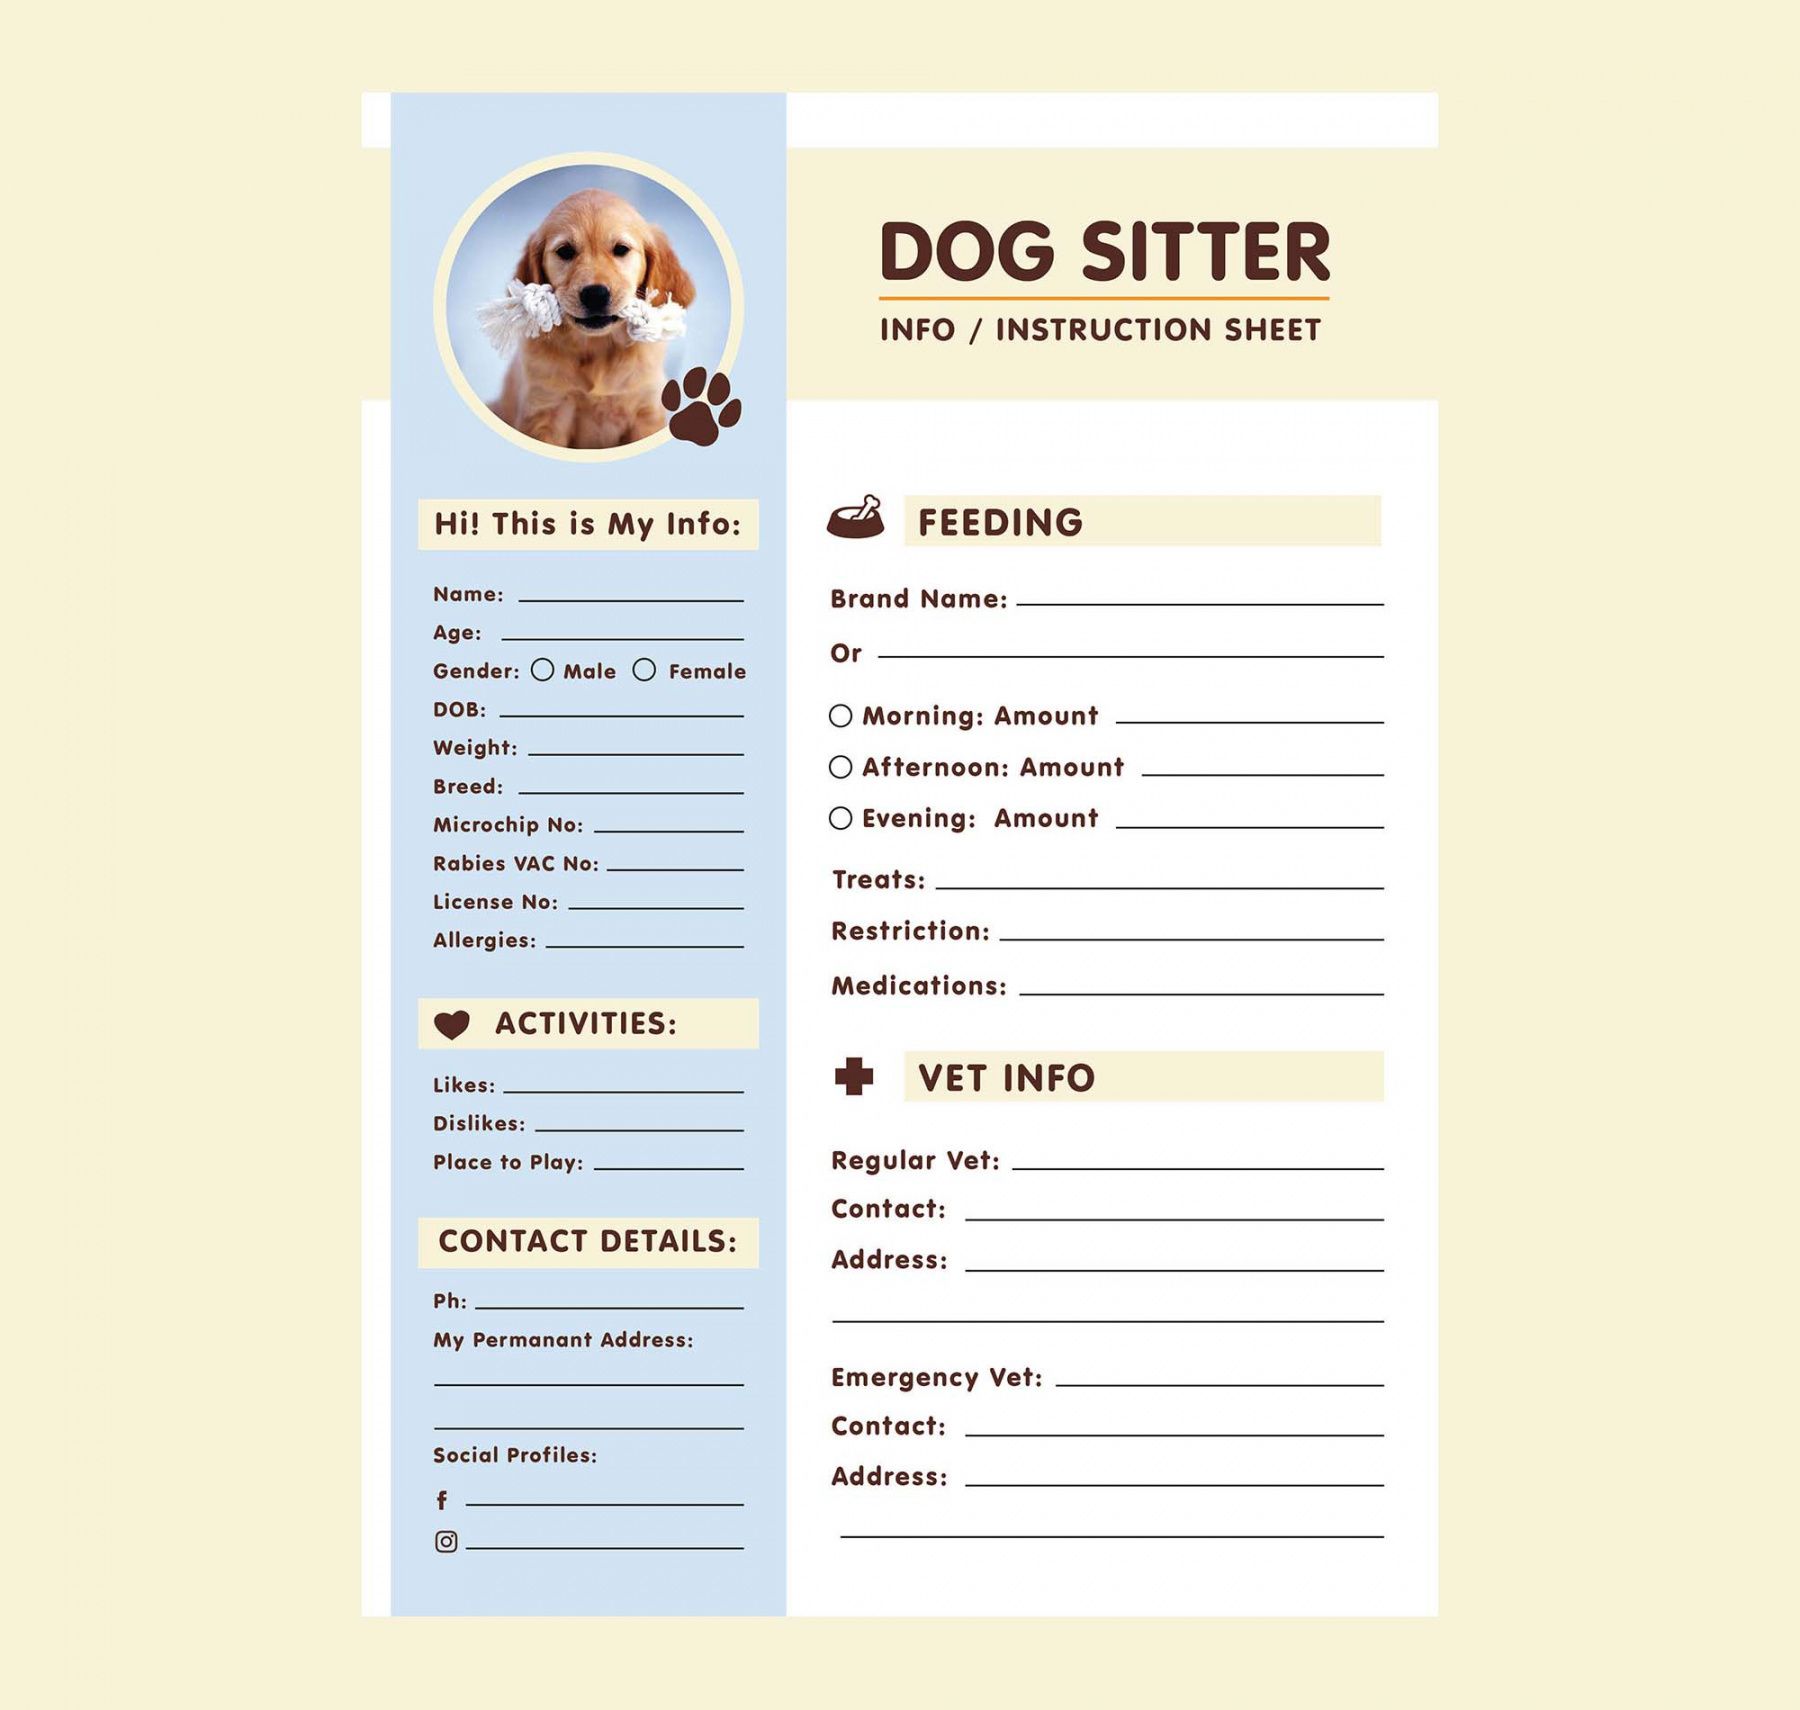 a4 dog sitter information sheet template ai dog sitting flyer template doc